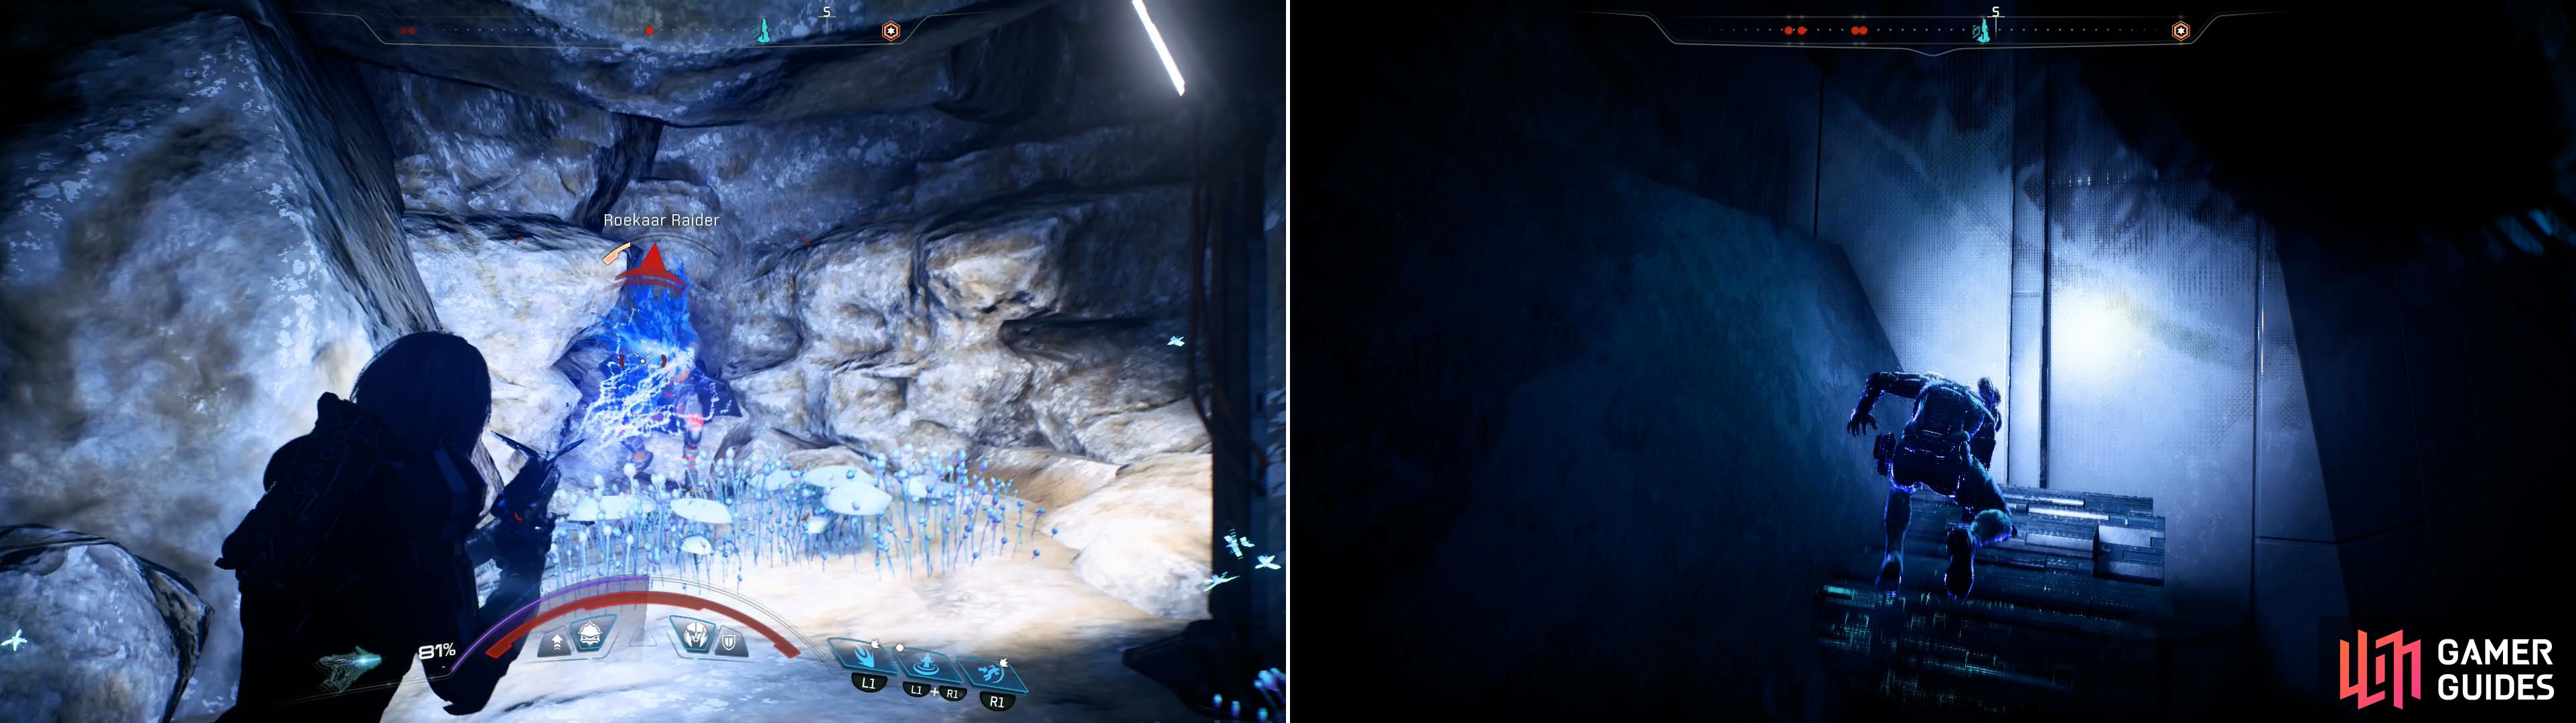 Kill the Roekaar in the cave to find the Remnant Console he was guarding (left) and use it to deploy some platforms you can use to reach previously unobtainable heights (right).